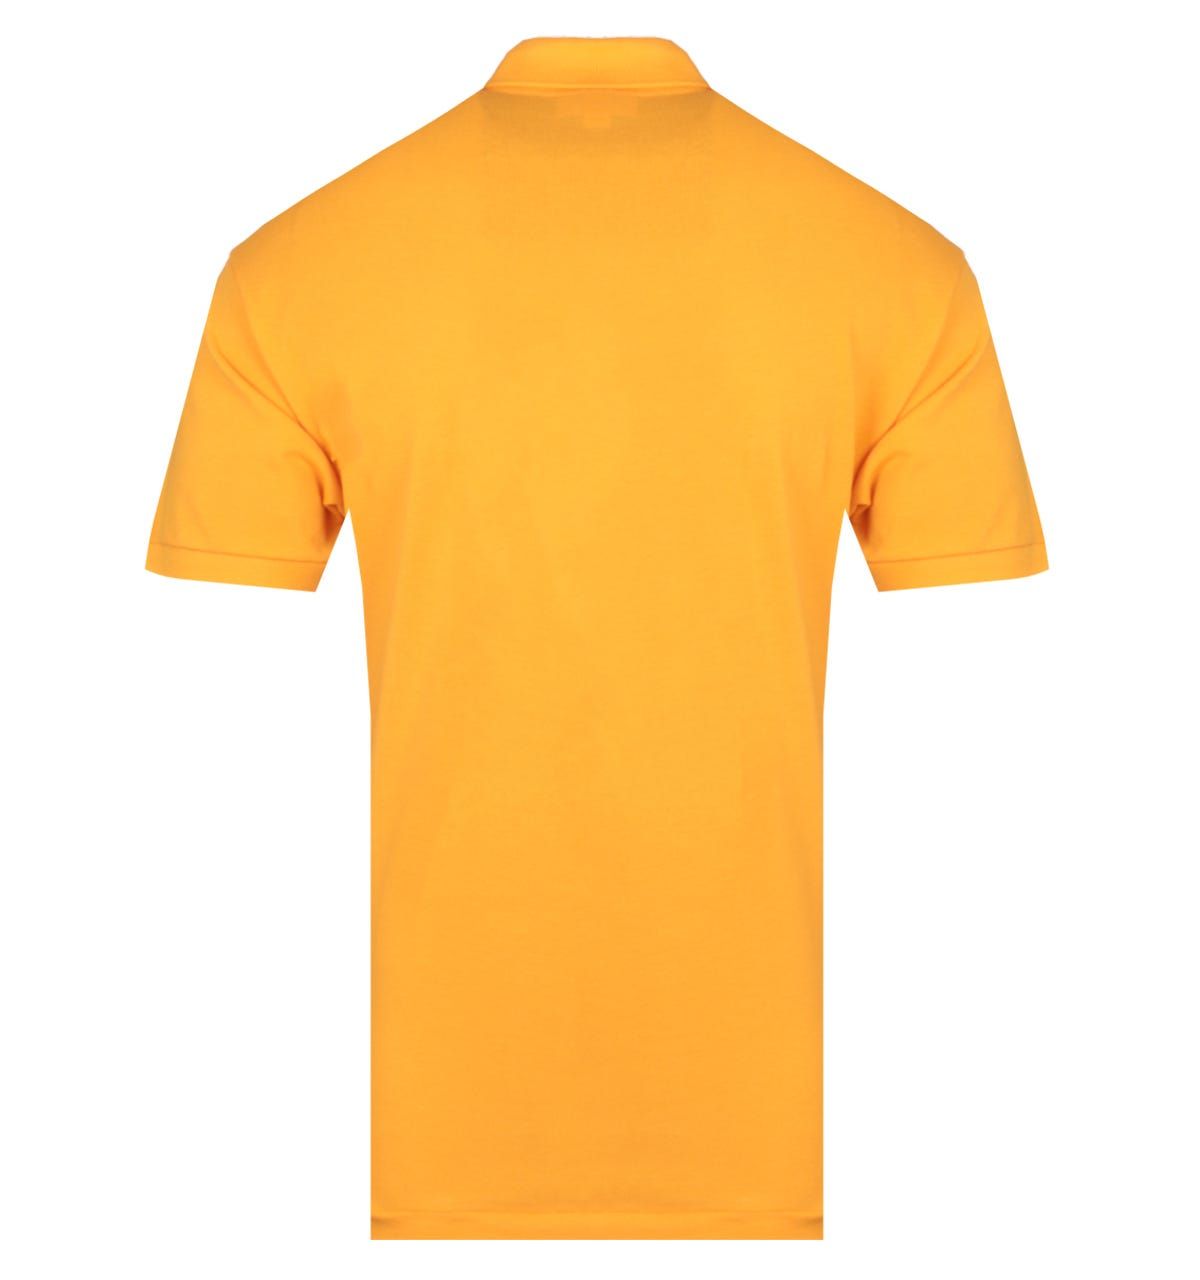 <p>A pure cotton composition crafted by Lacoste. The Lacoste Orange MC Homme Polo Shirt is fitted with a two-button placket, spread collar and ribbed trims. The design is finished with the Lacoste logo embroidered on the chest.</p><ul><li>Cotton composition</li><li>Two button placket</li><li>Tonal stitching</li><li>Ribbed trims</li><li>Lacoste logo embroidered on chest</li></ul><p>Style & Fit:</p><ul><li>Regular fit</li><li>Fits true to size</li></ul><p>Fabric Composition & Care:</p><ul><li>100% Cotton</li><li>Machine washable</li></ul>